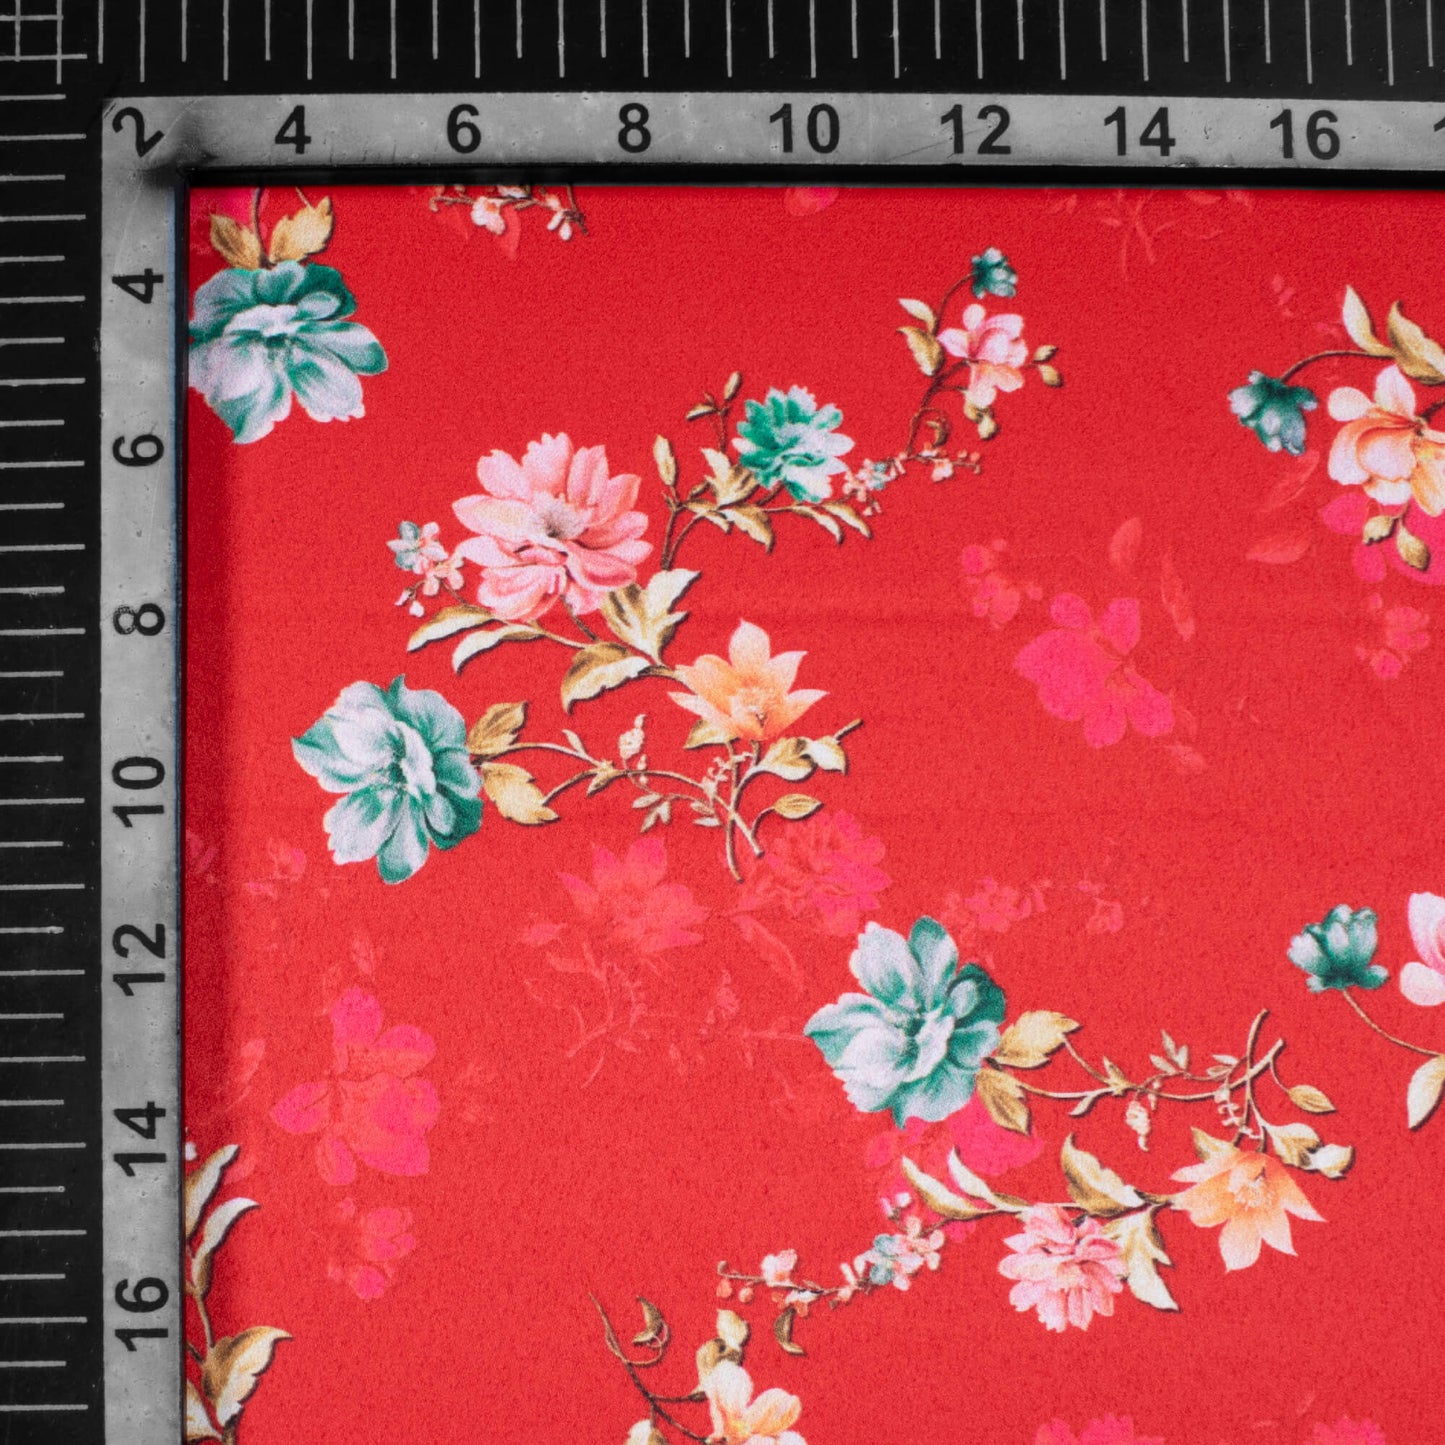 Sangria Red And Taffy Pink Floral Pattern Digital Print Charmeuse Satin Fabric (Width 58 Inches)